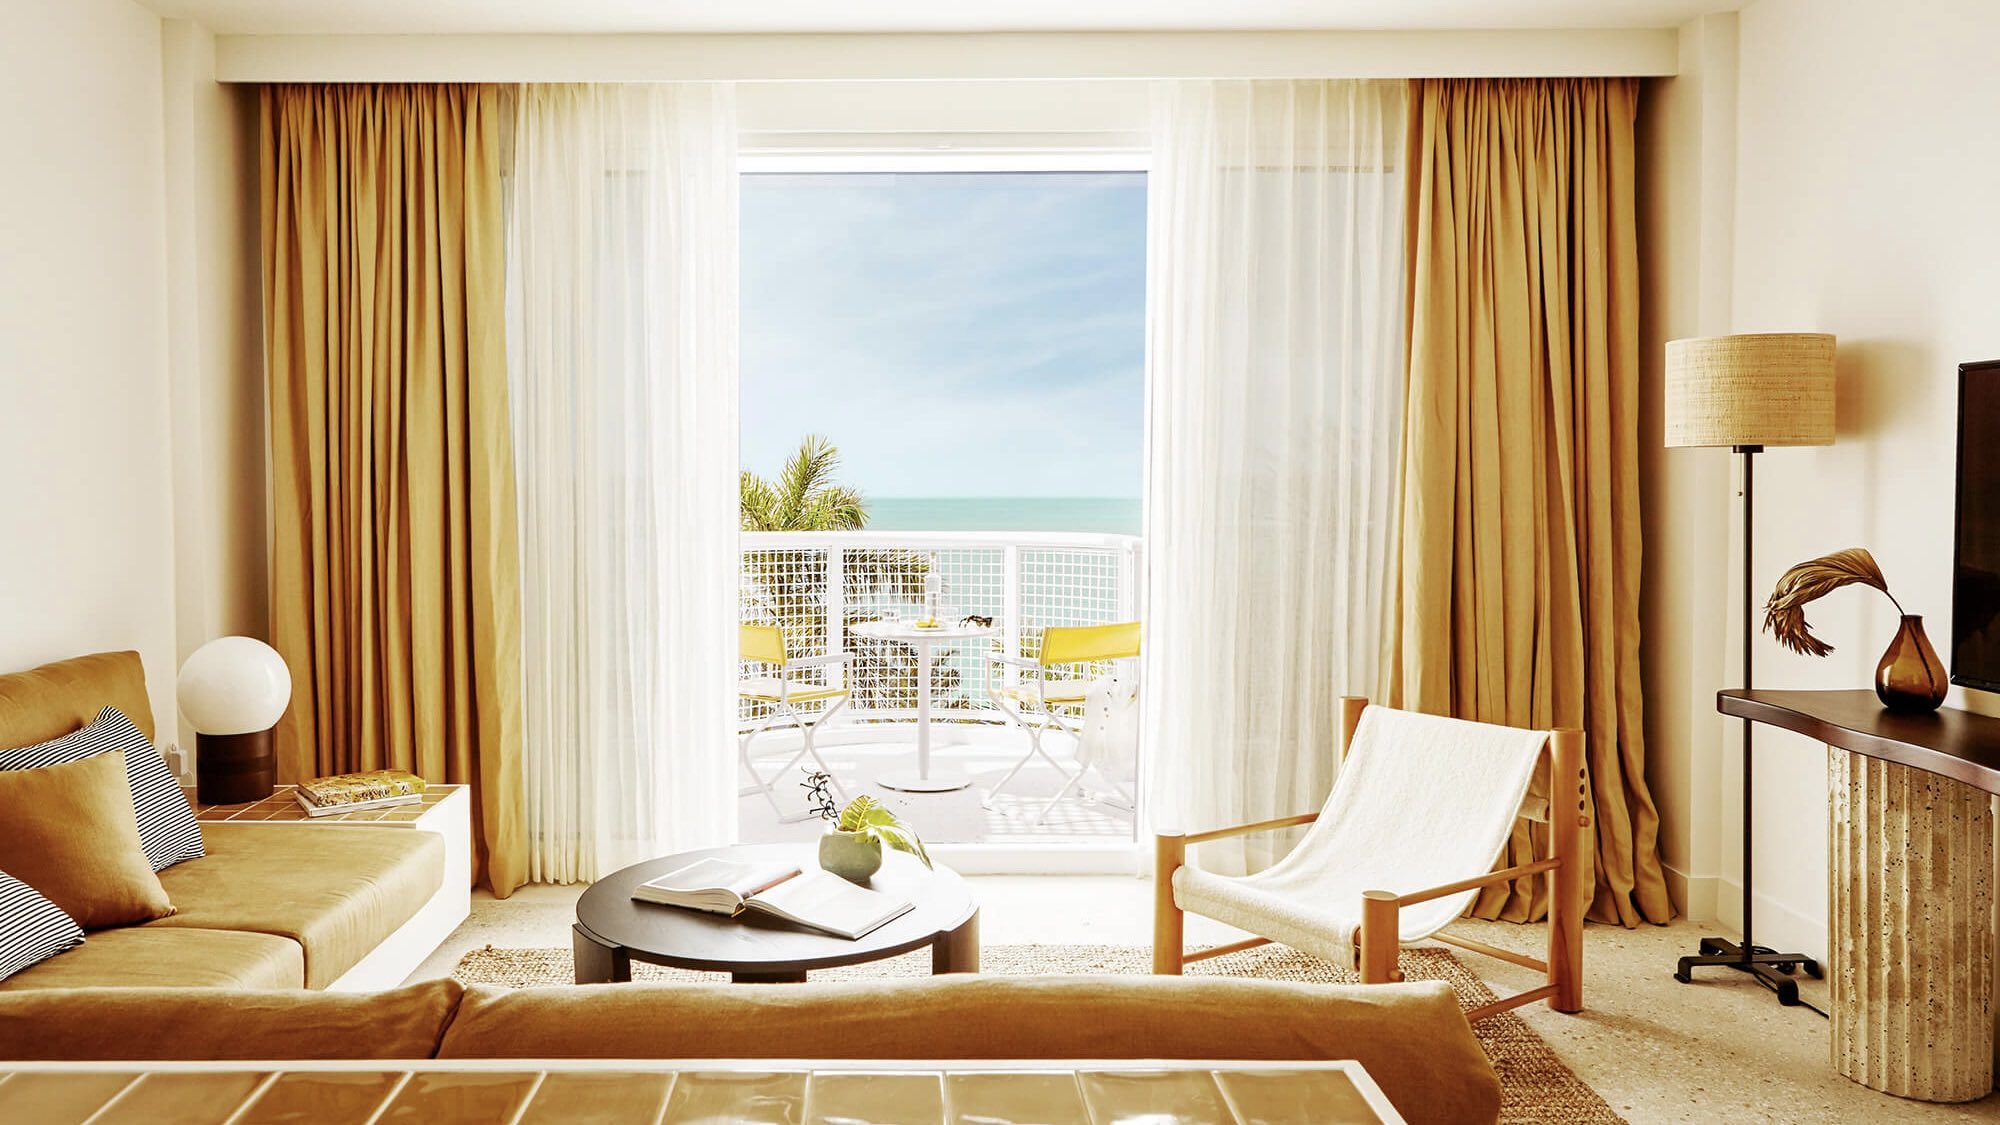 Palm Heights bedroom view over beach at one of the best luxury hotels in Cayman Islands